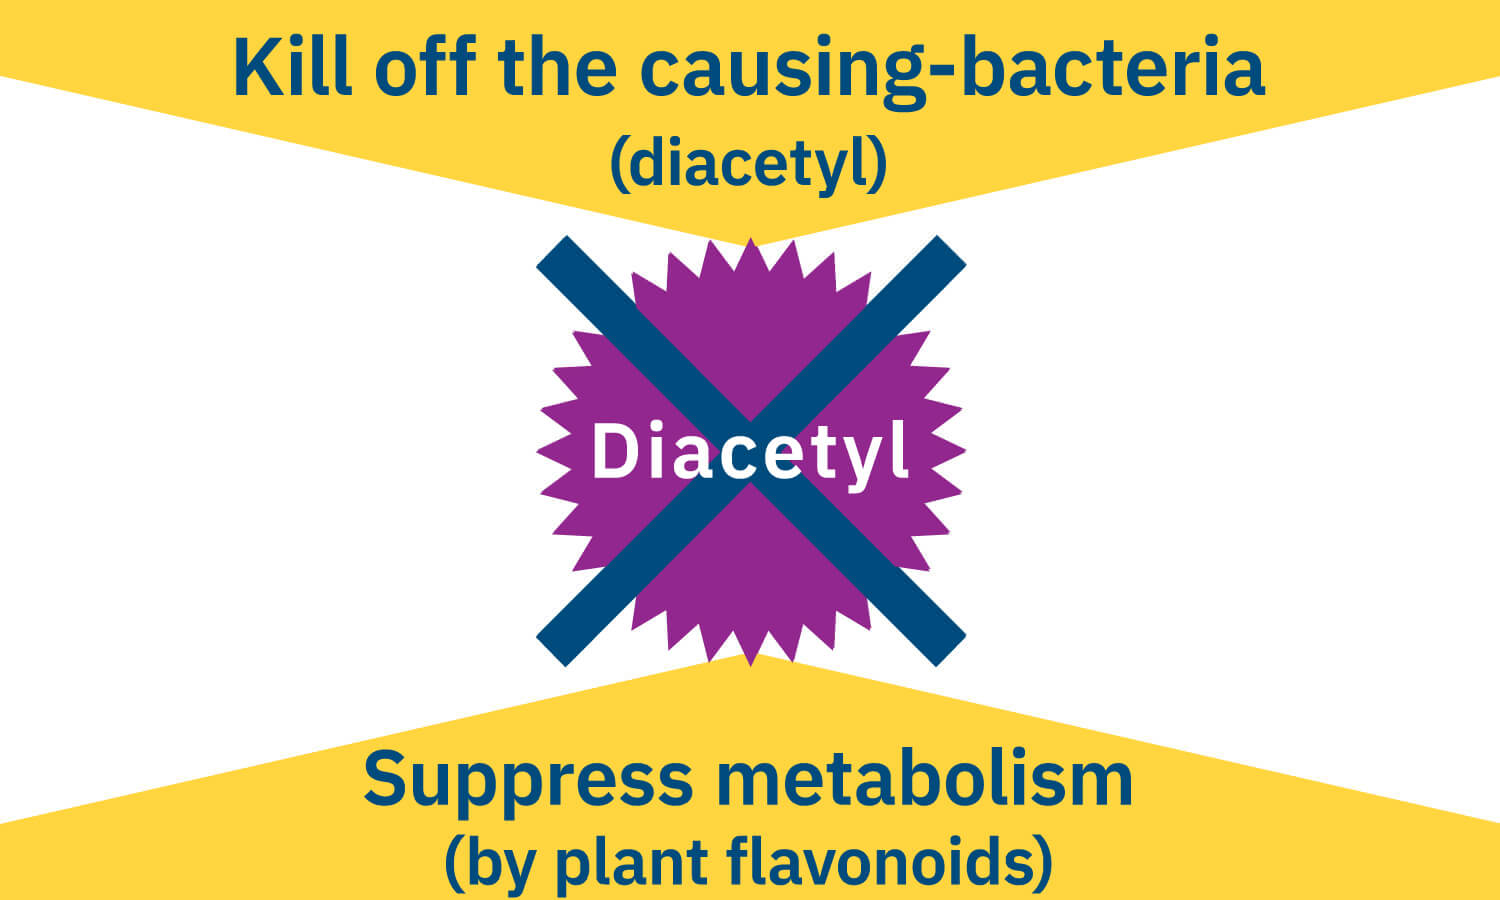 Prevent generating diacetyl by kill off generated bacteria and suppress metabolites (by plant flavonoids)